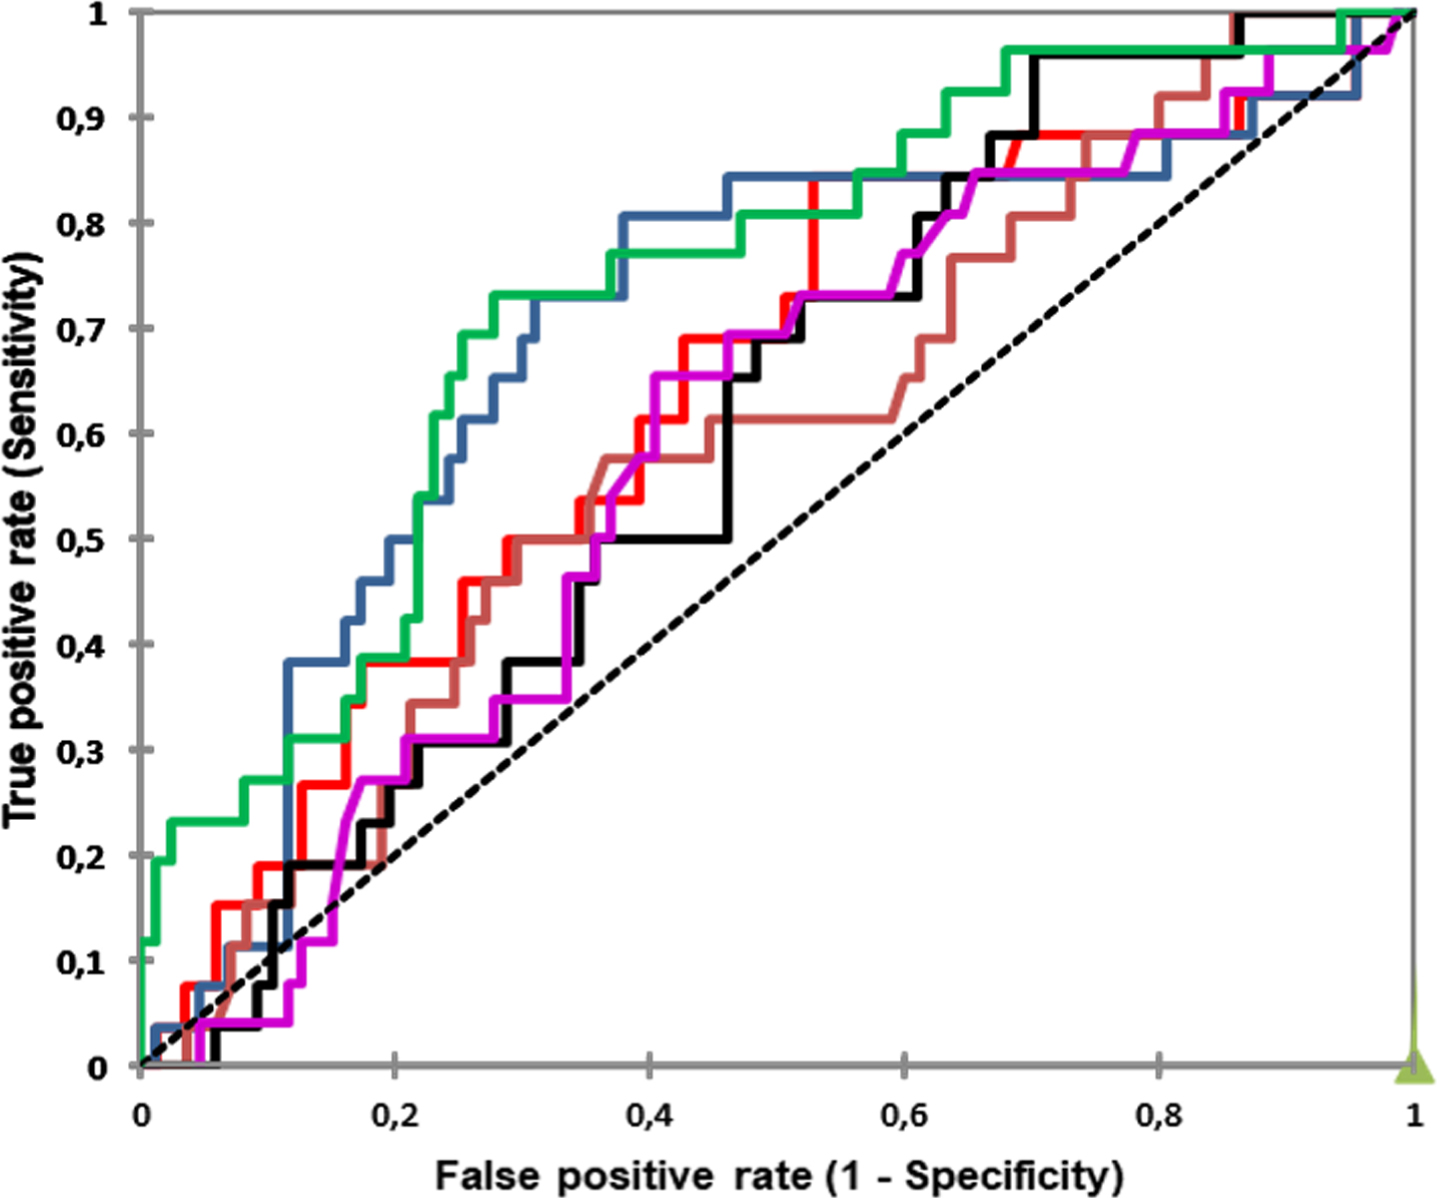 ROC curves for all the markers at preoperative period and their relation to BCR. Red PSA (AUC 0.64), Blue [–2]proPSA (AUC 0.70), Green PHI (AUC 0.74), Brown hK2 (AUC 0.60), Violet fPSA (AUC 0.59), Black fPSA/PSA (AUC 0.60).